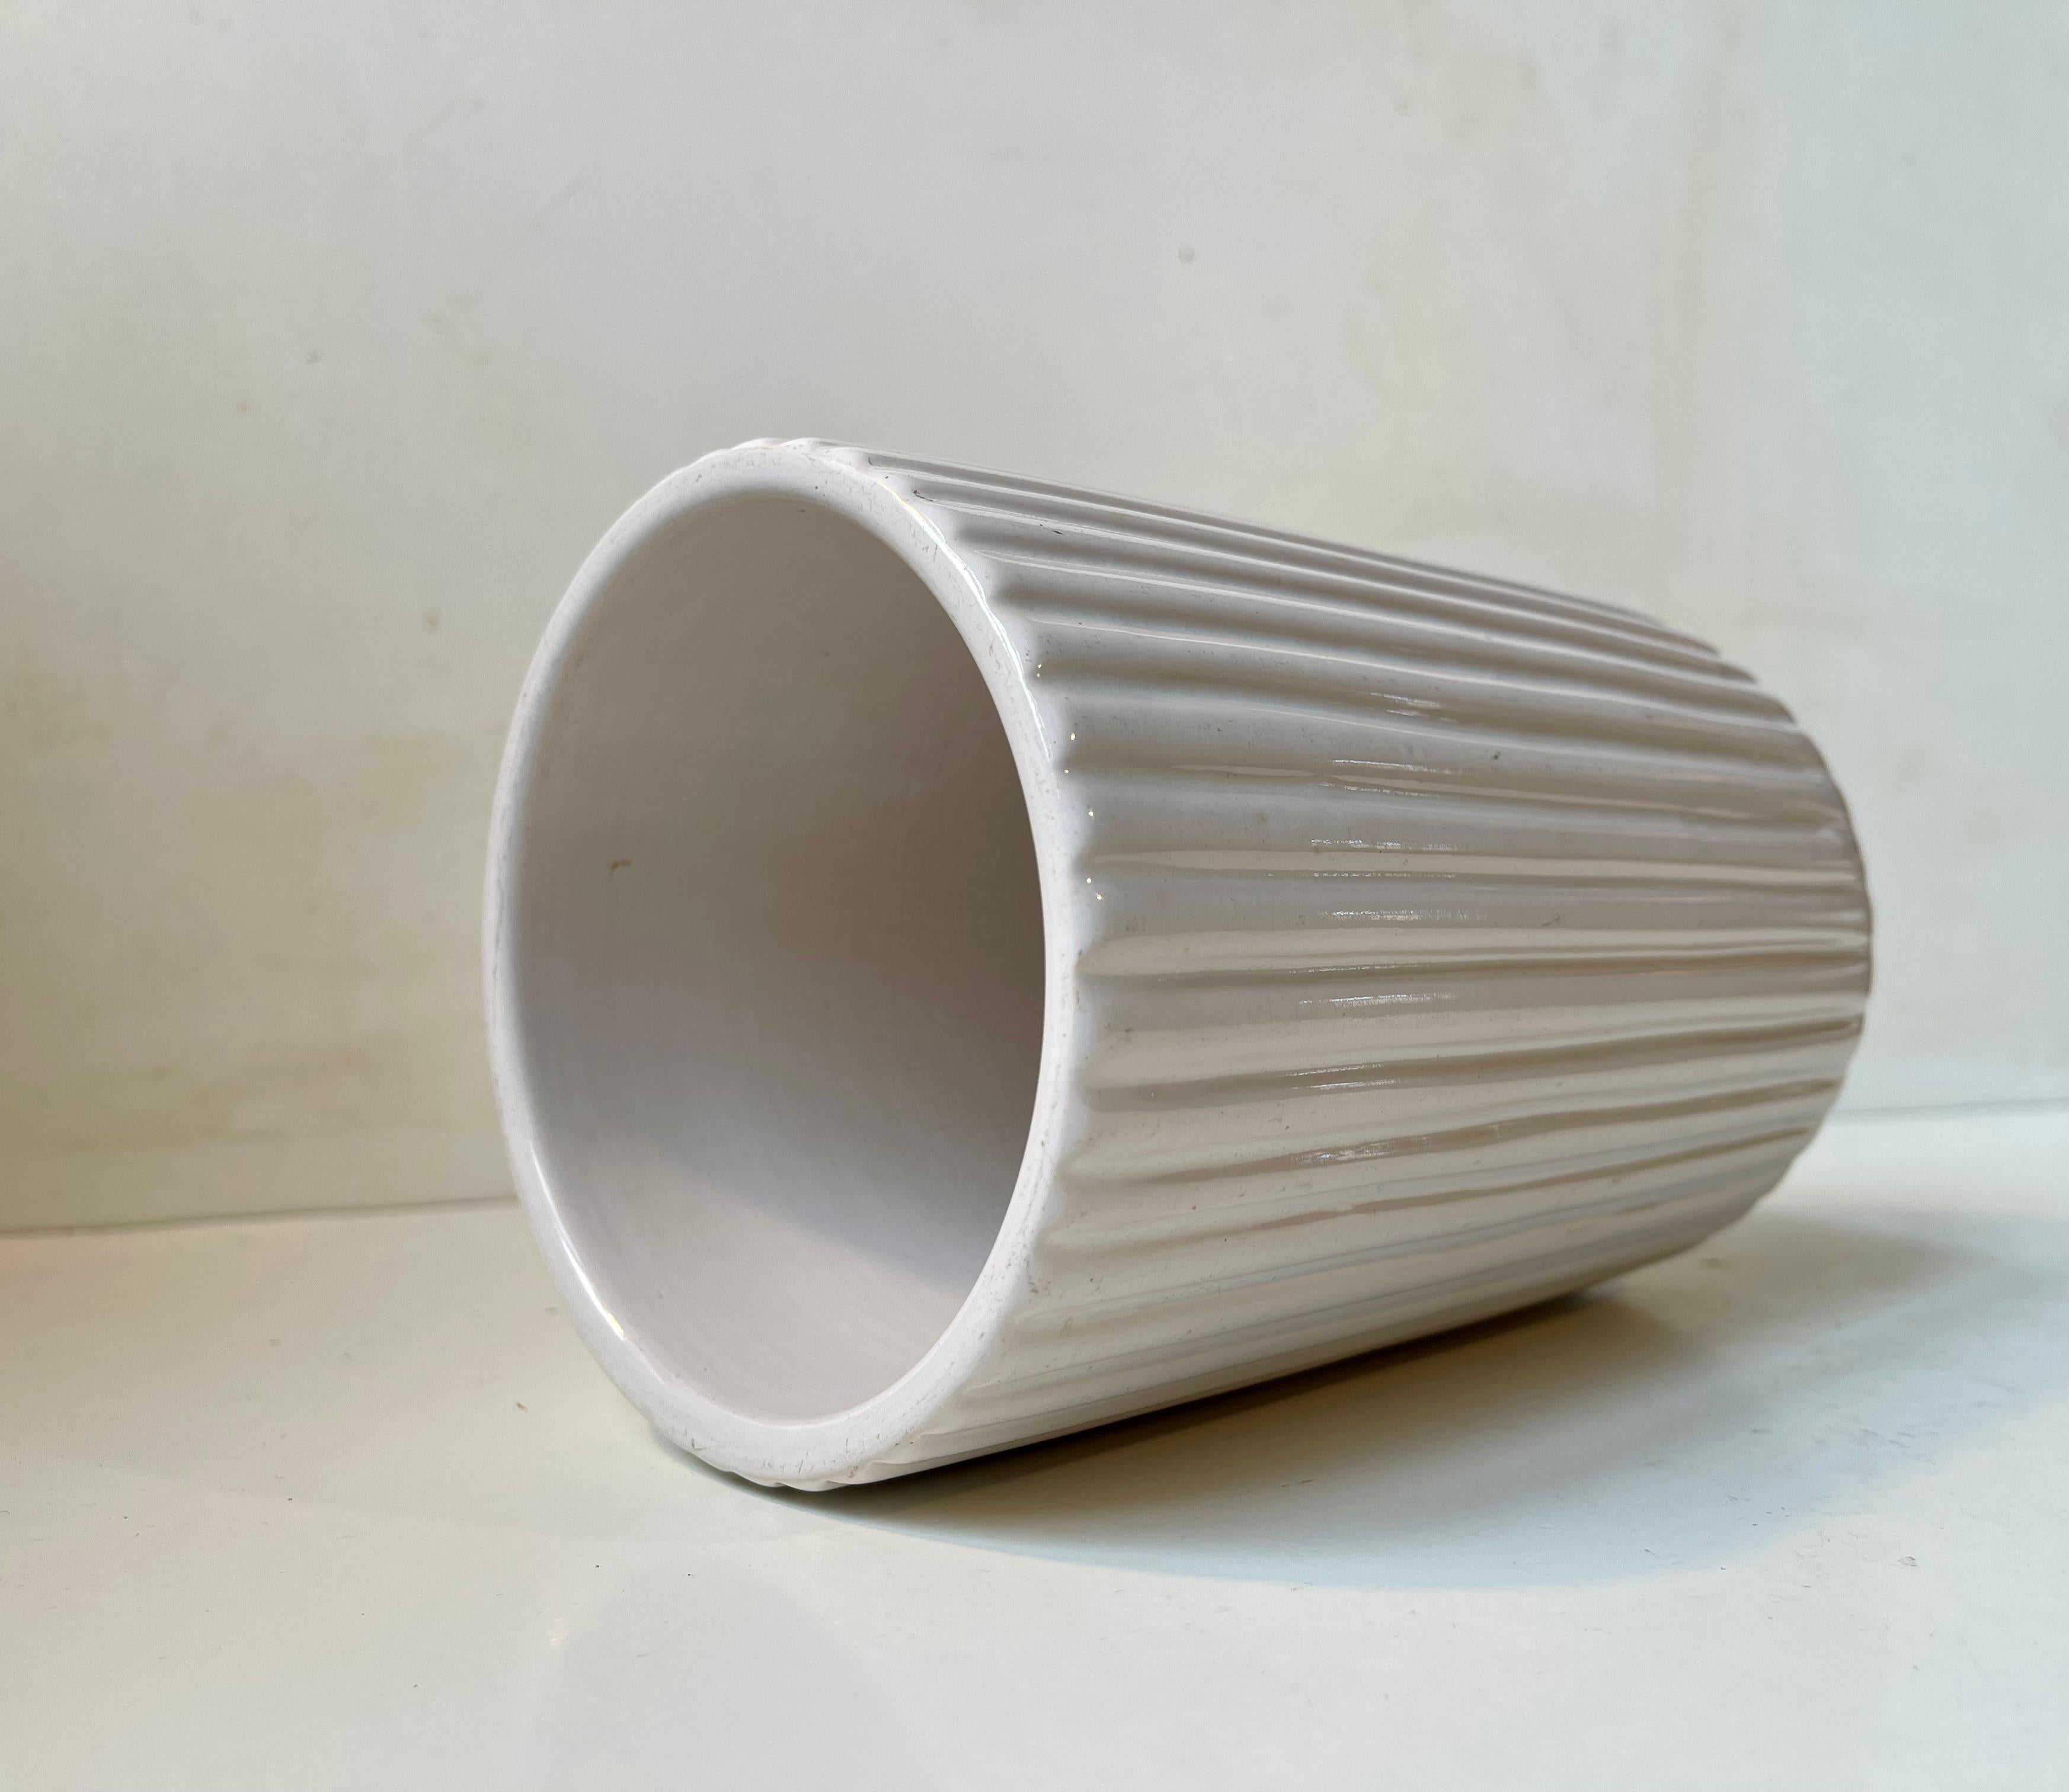 Danish Fluted Architectural Ceramic Vase in White Glaze by L. Hjorth, 1940s For Sale